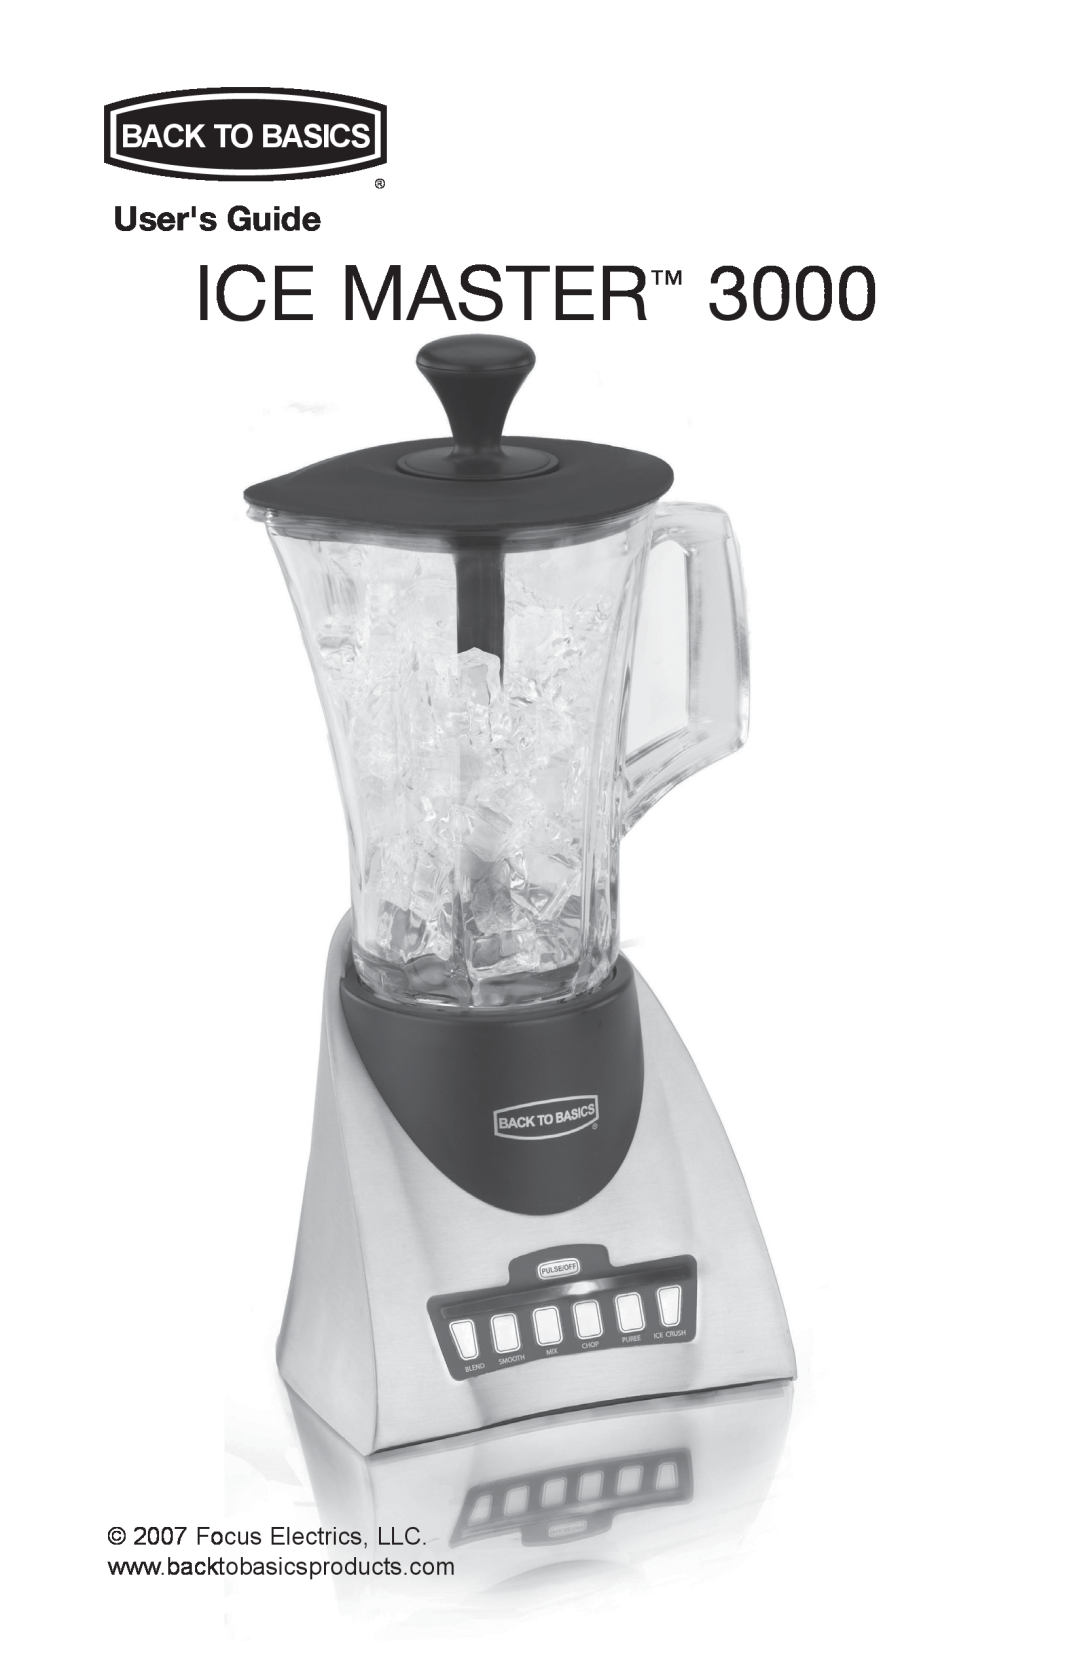 West Bend 3000 manual Ice Master, Users Guide, Back To Basics 